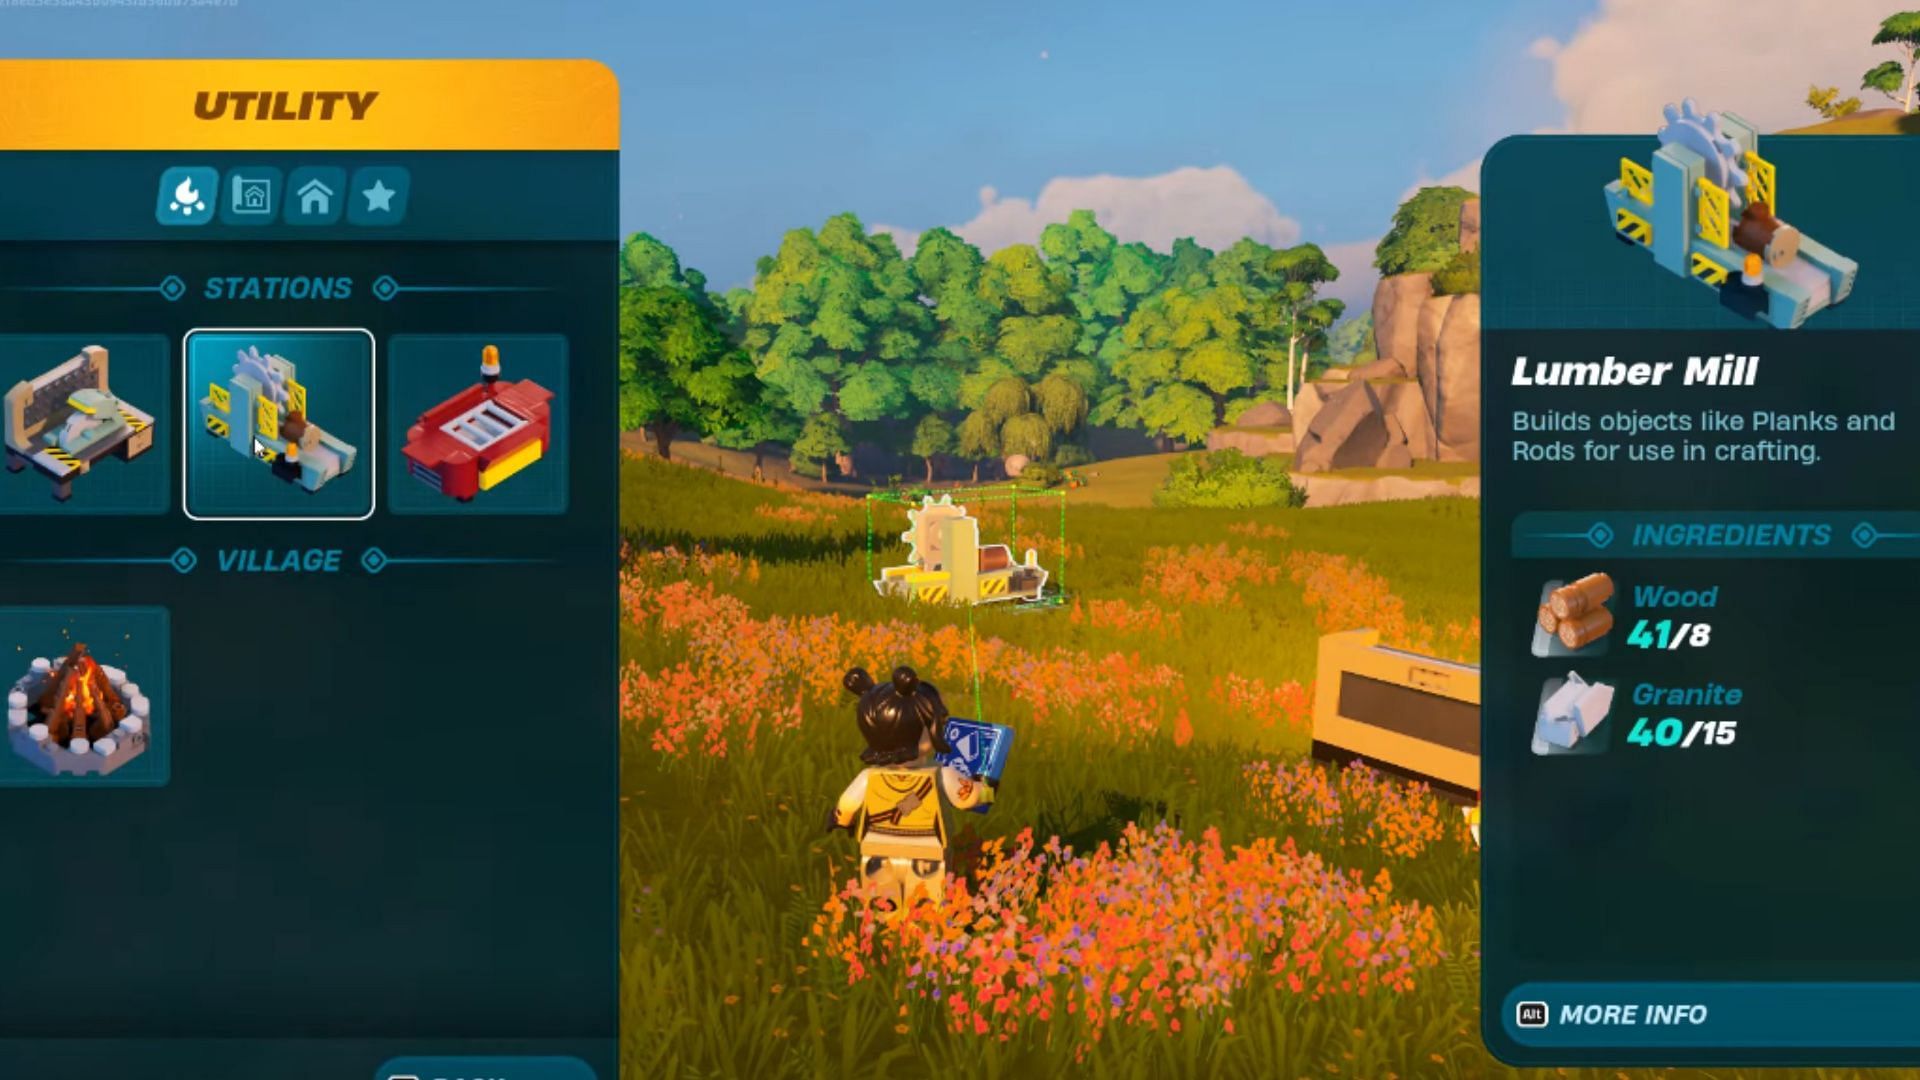 With the help of Lumber Mlll, you can craft Wooden Rods in LEGO Fortnite (Image via YouTube/ WoW Quests)